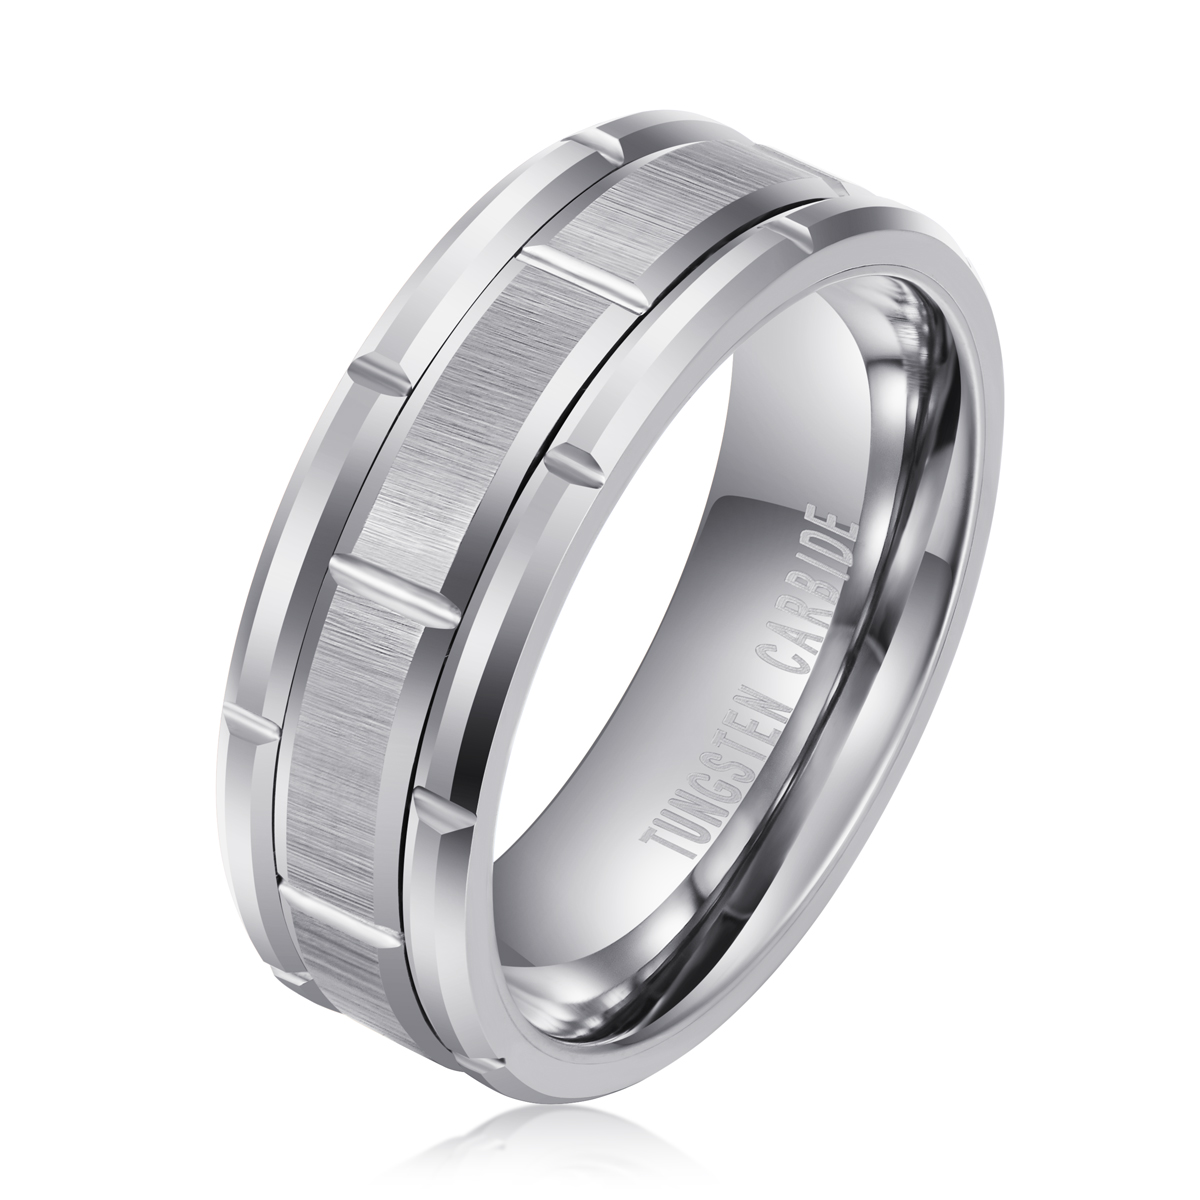 China tungsten rings men combination rings silver plated 8mm men tungsten men fashion jewelry Featured Image